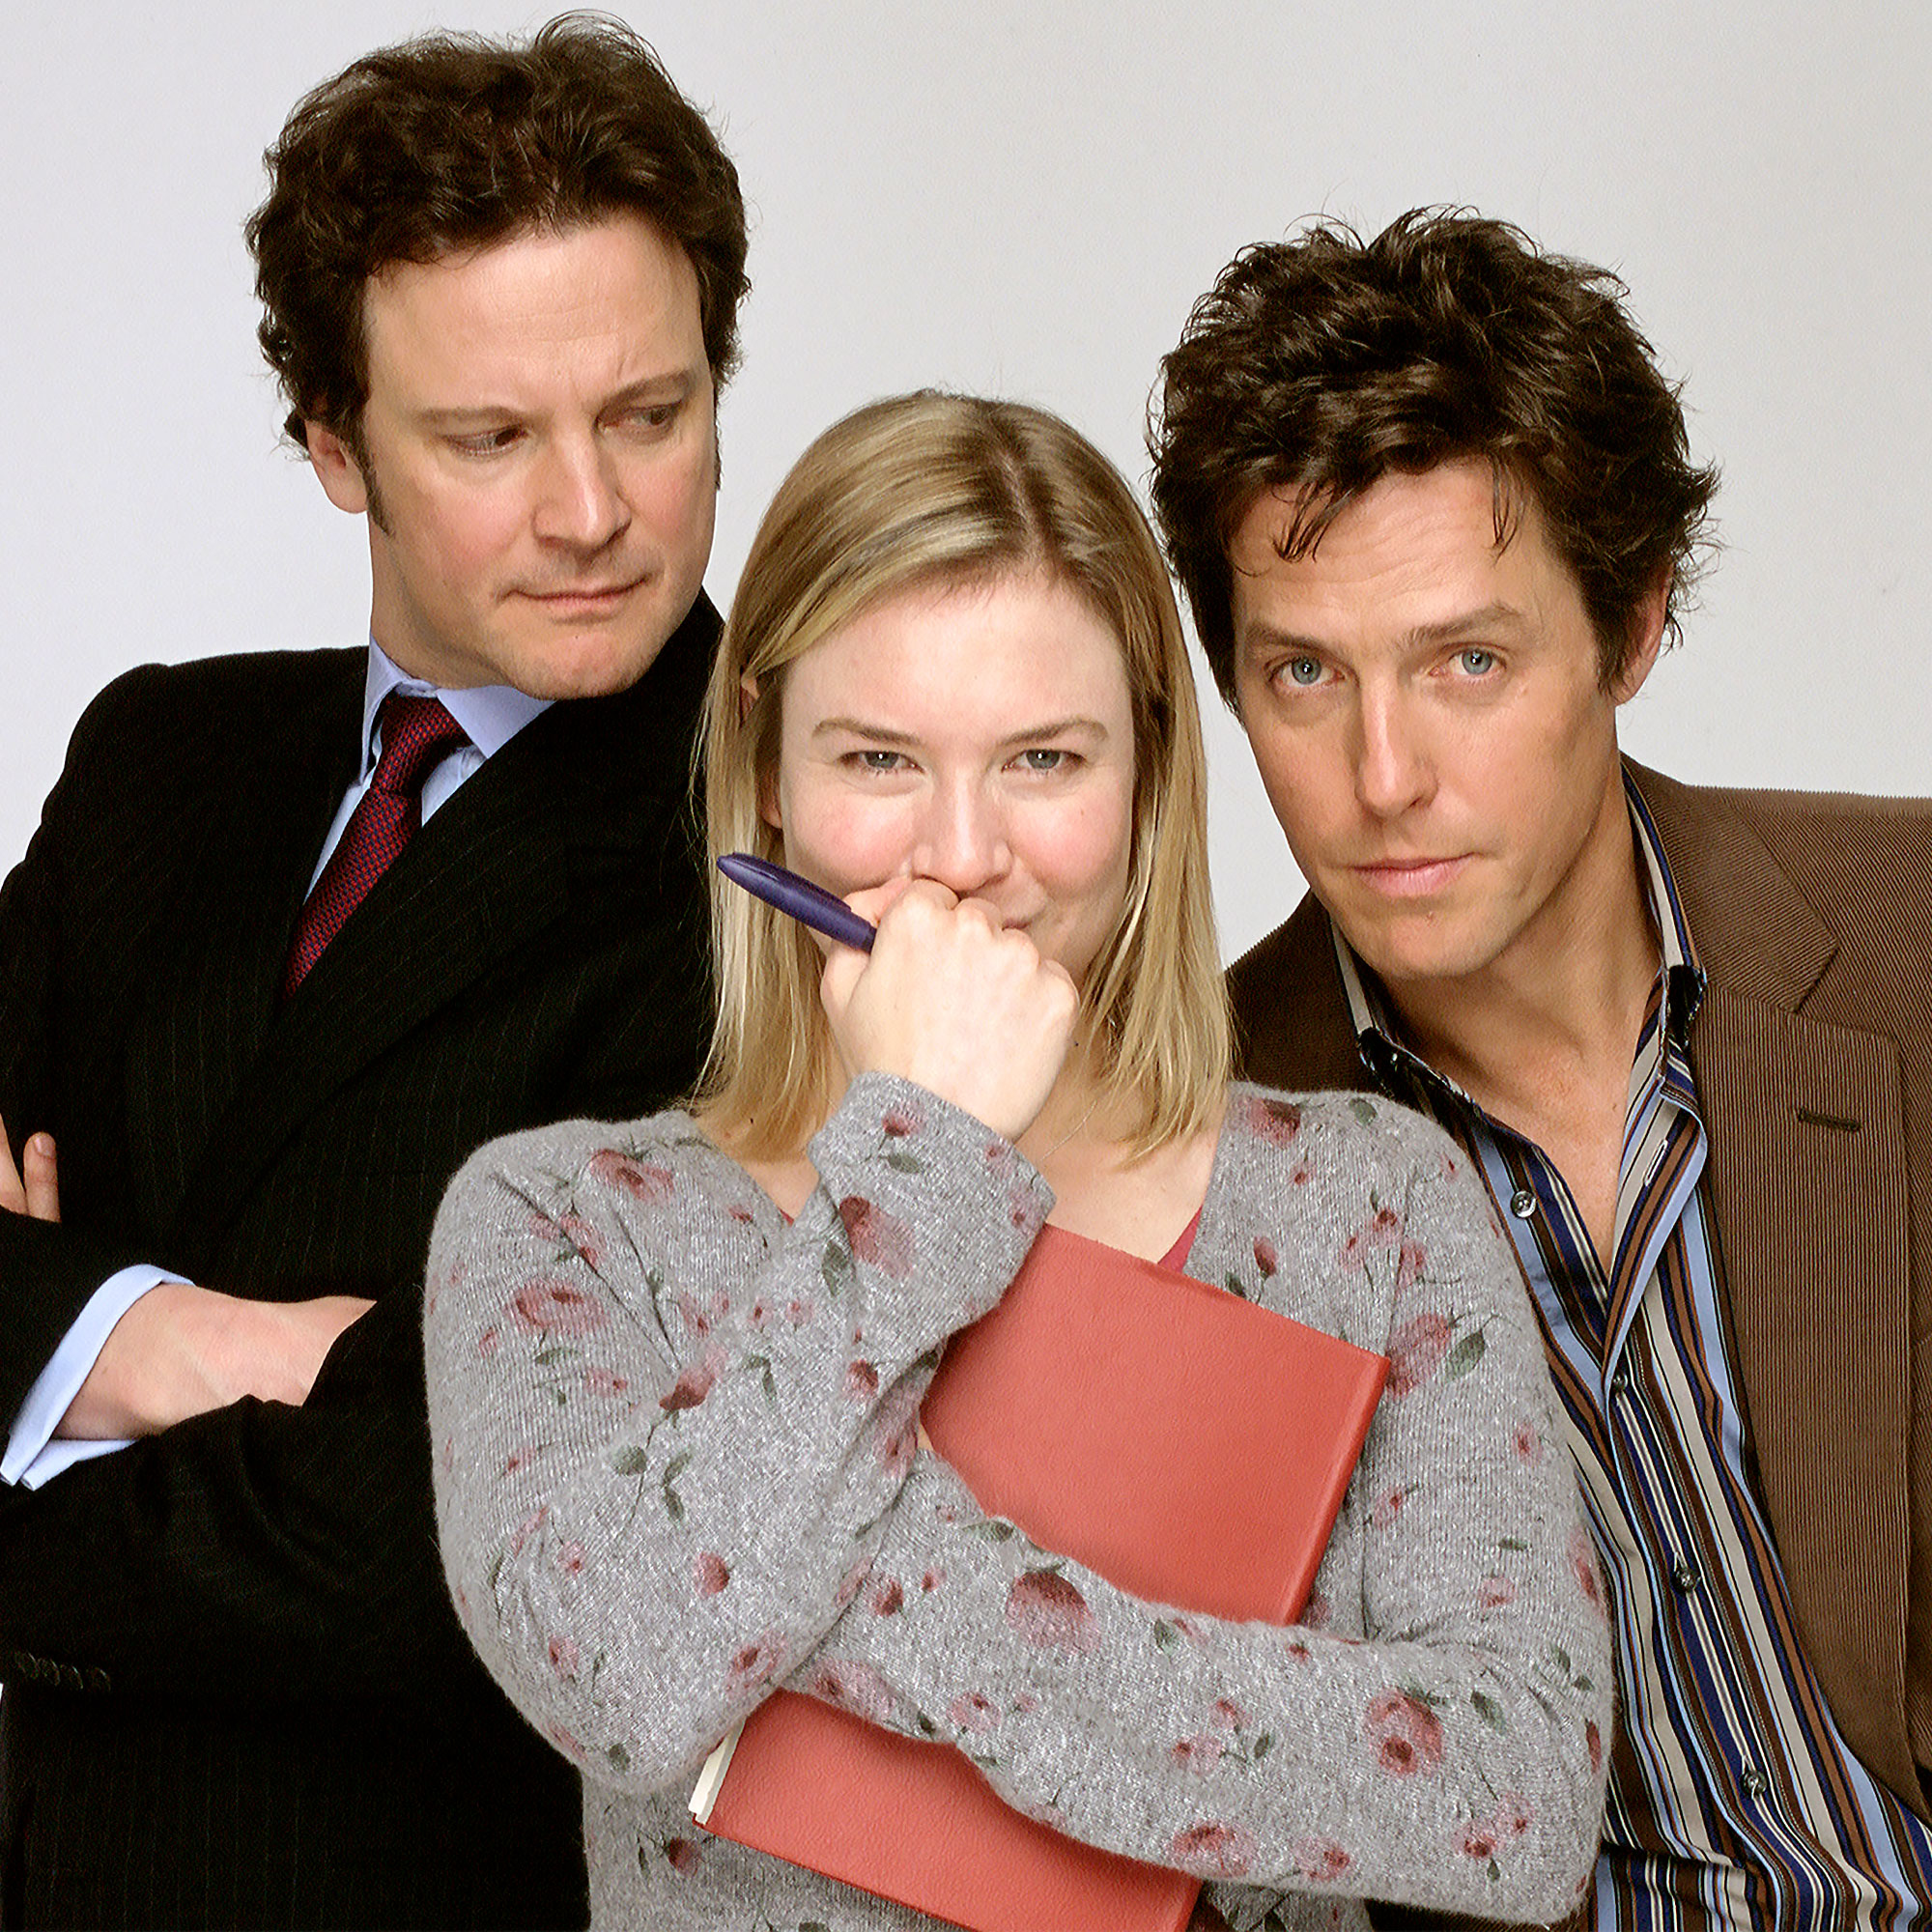 Renee Zellweger on whether Bridget Jones ends up with the right man